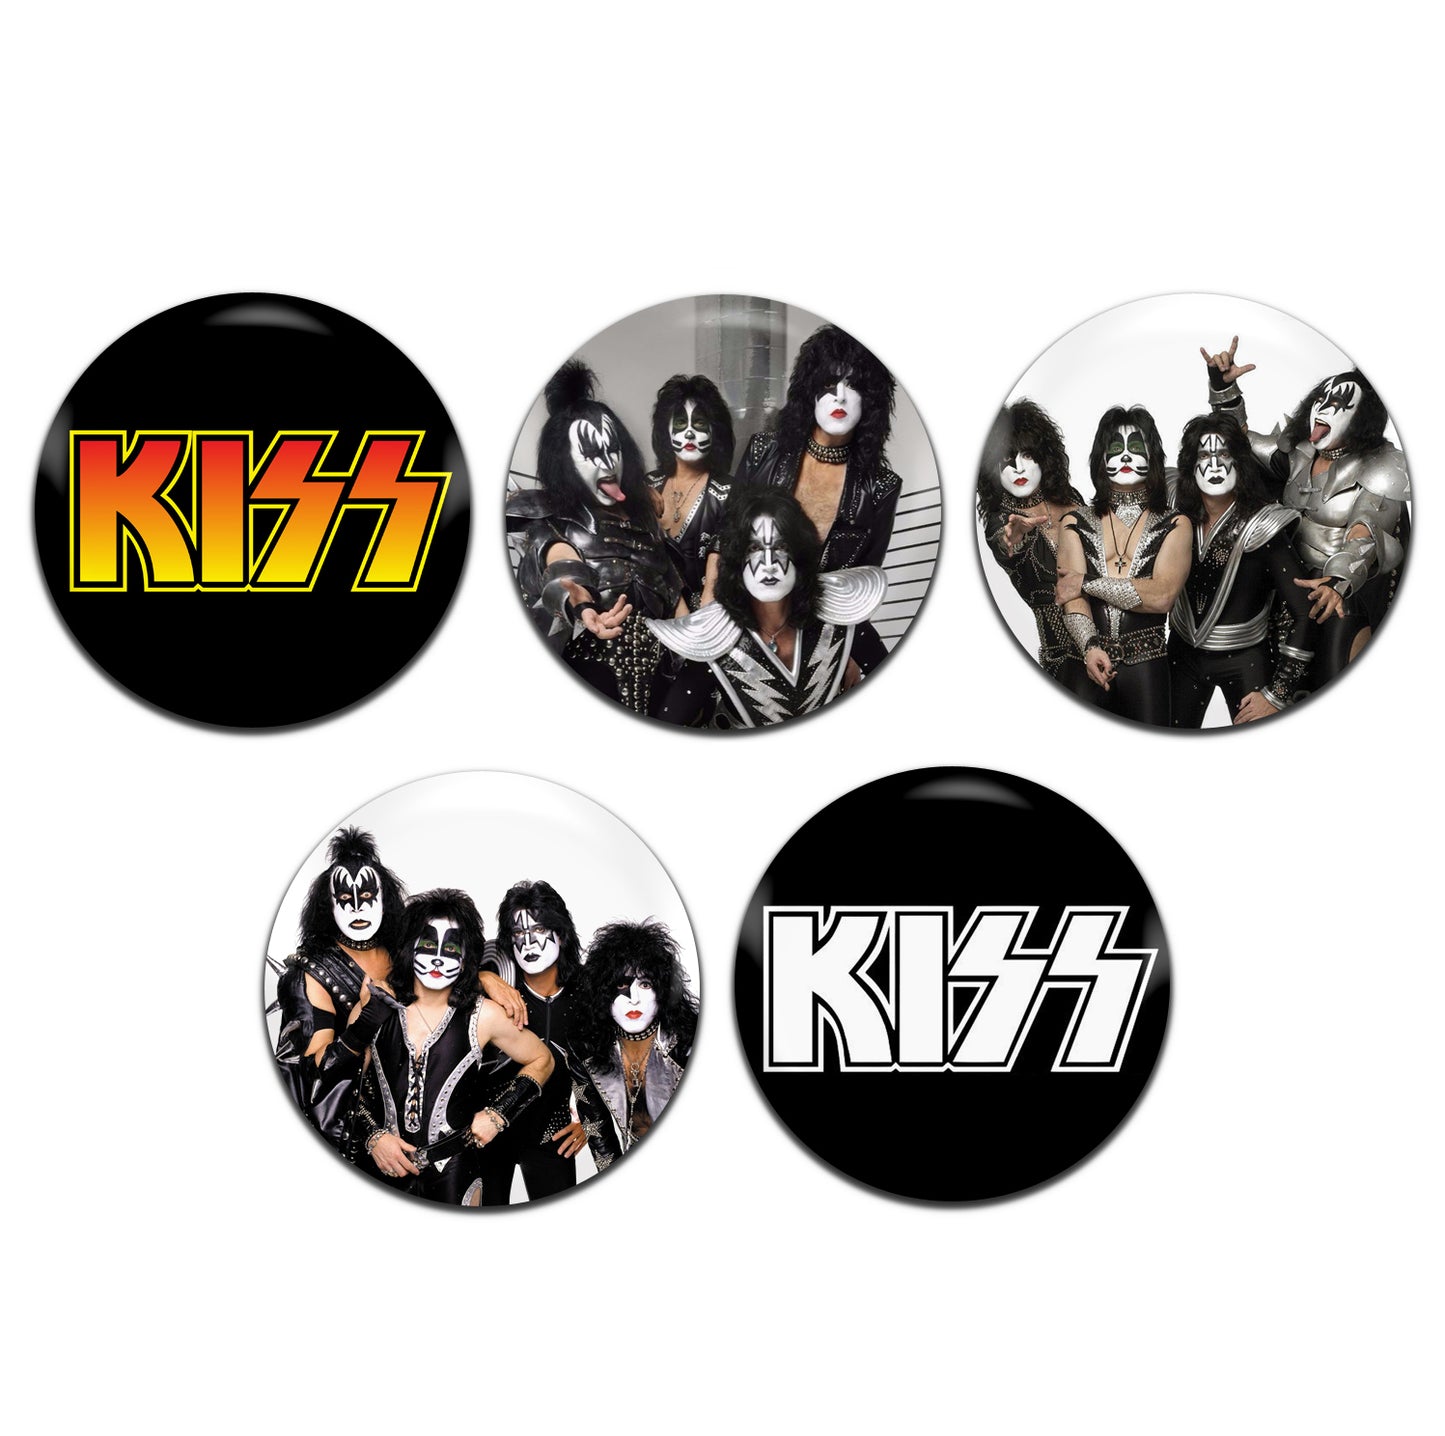 Kiss Heavy Rock Glam Metal Band 70's 80's 25mm / 1 Inch D-Pin Button Badges (5x Set)